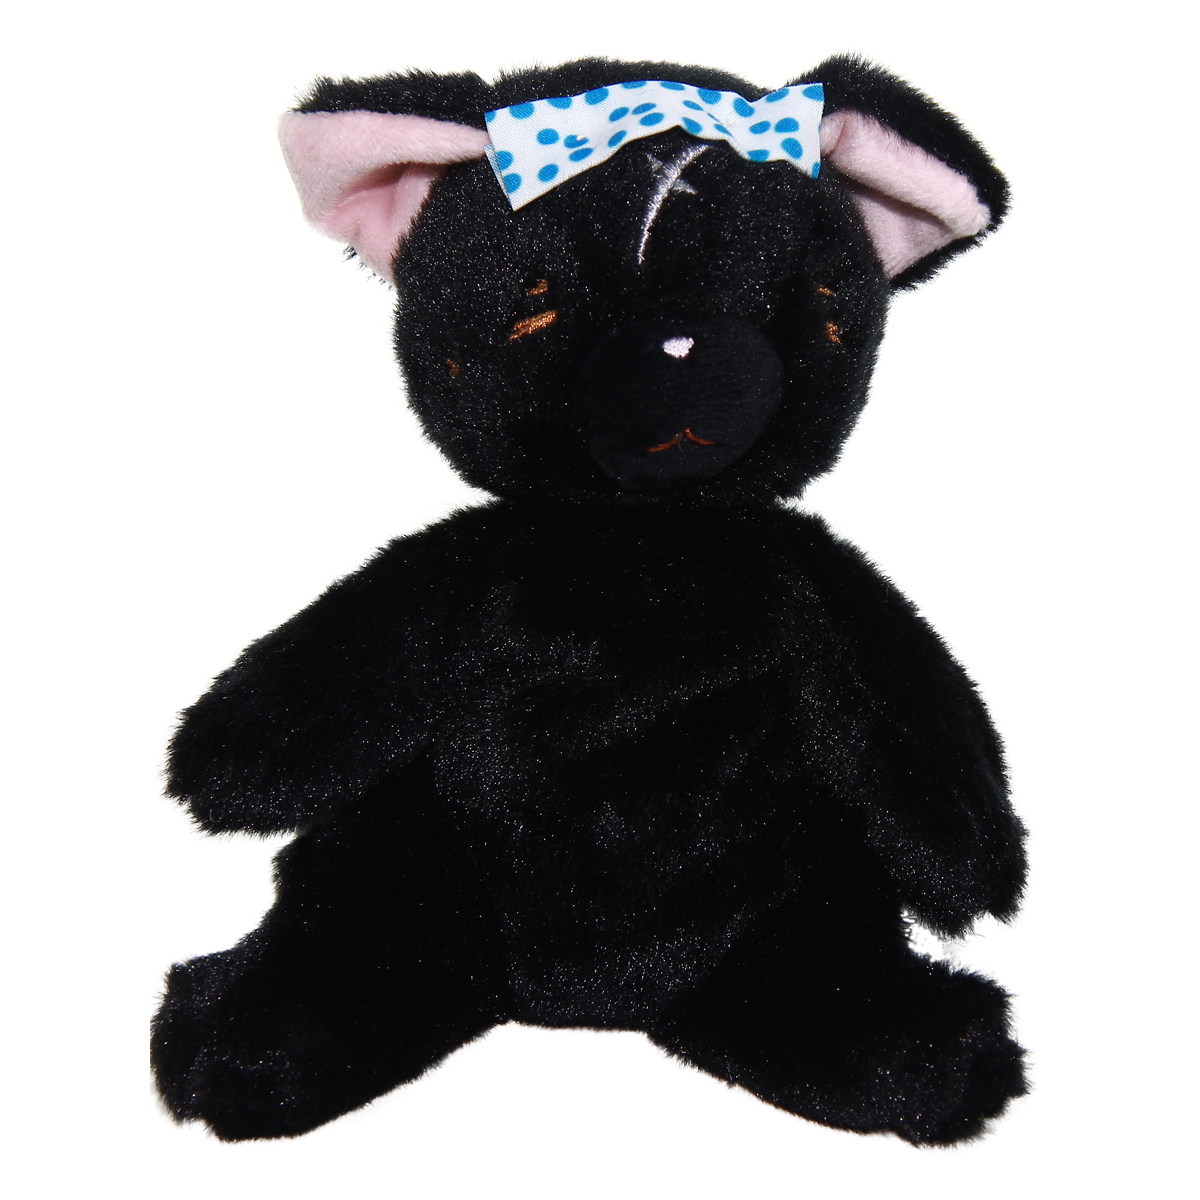 Cat Plush Doll, Hot Springs Collection, Stuffed Animal Toy, Black, 6 Inches